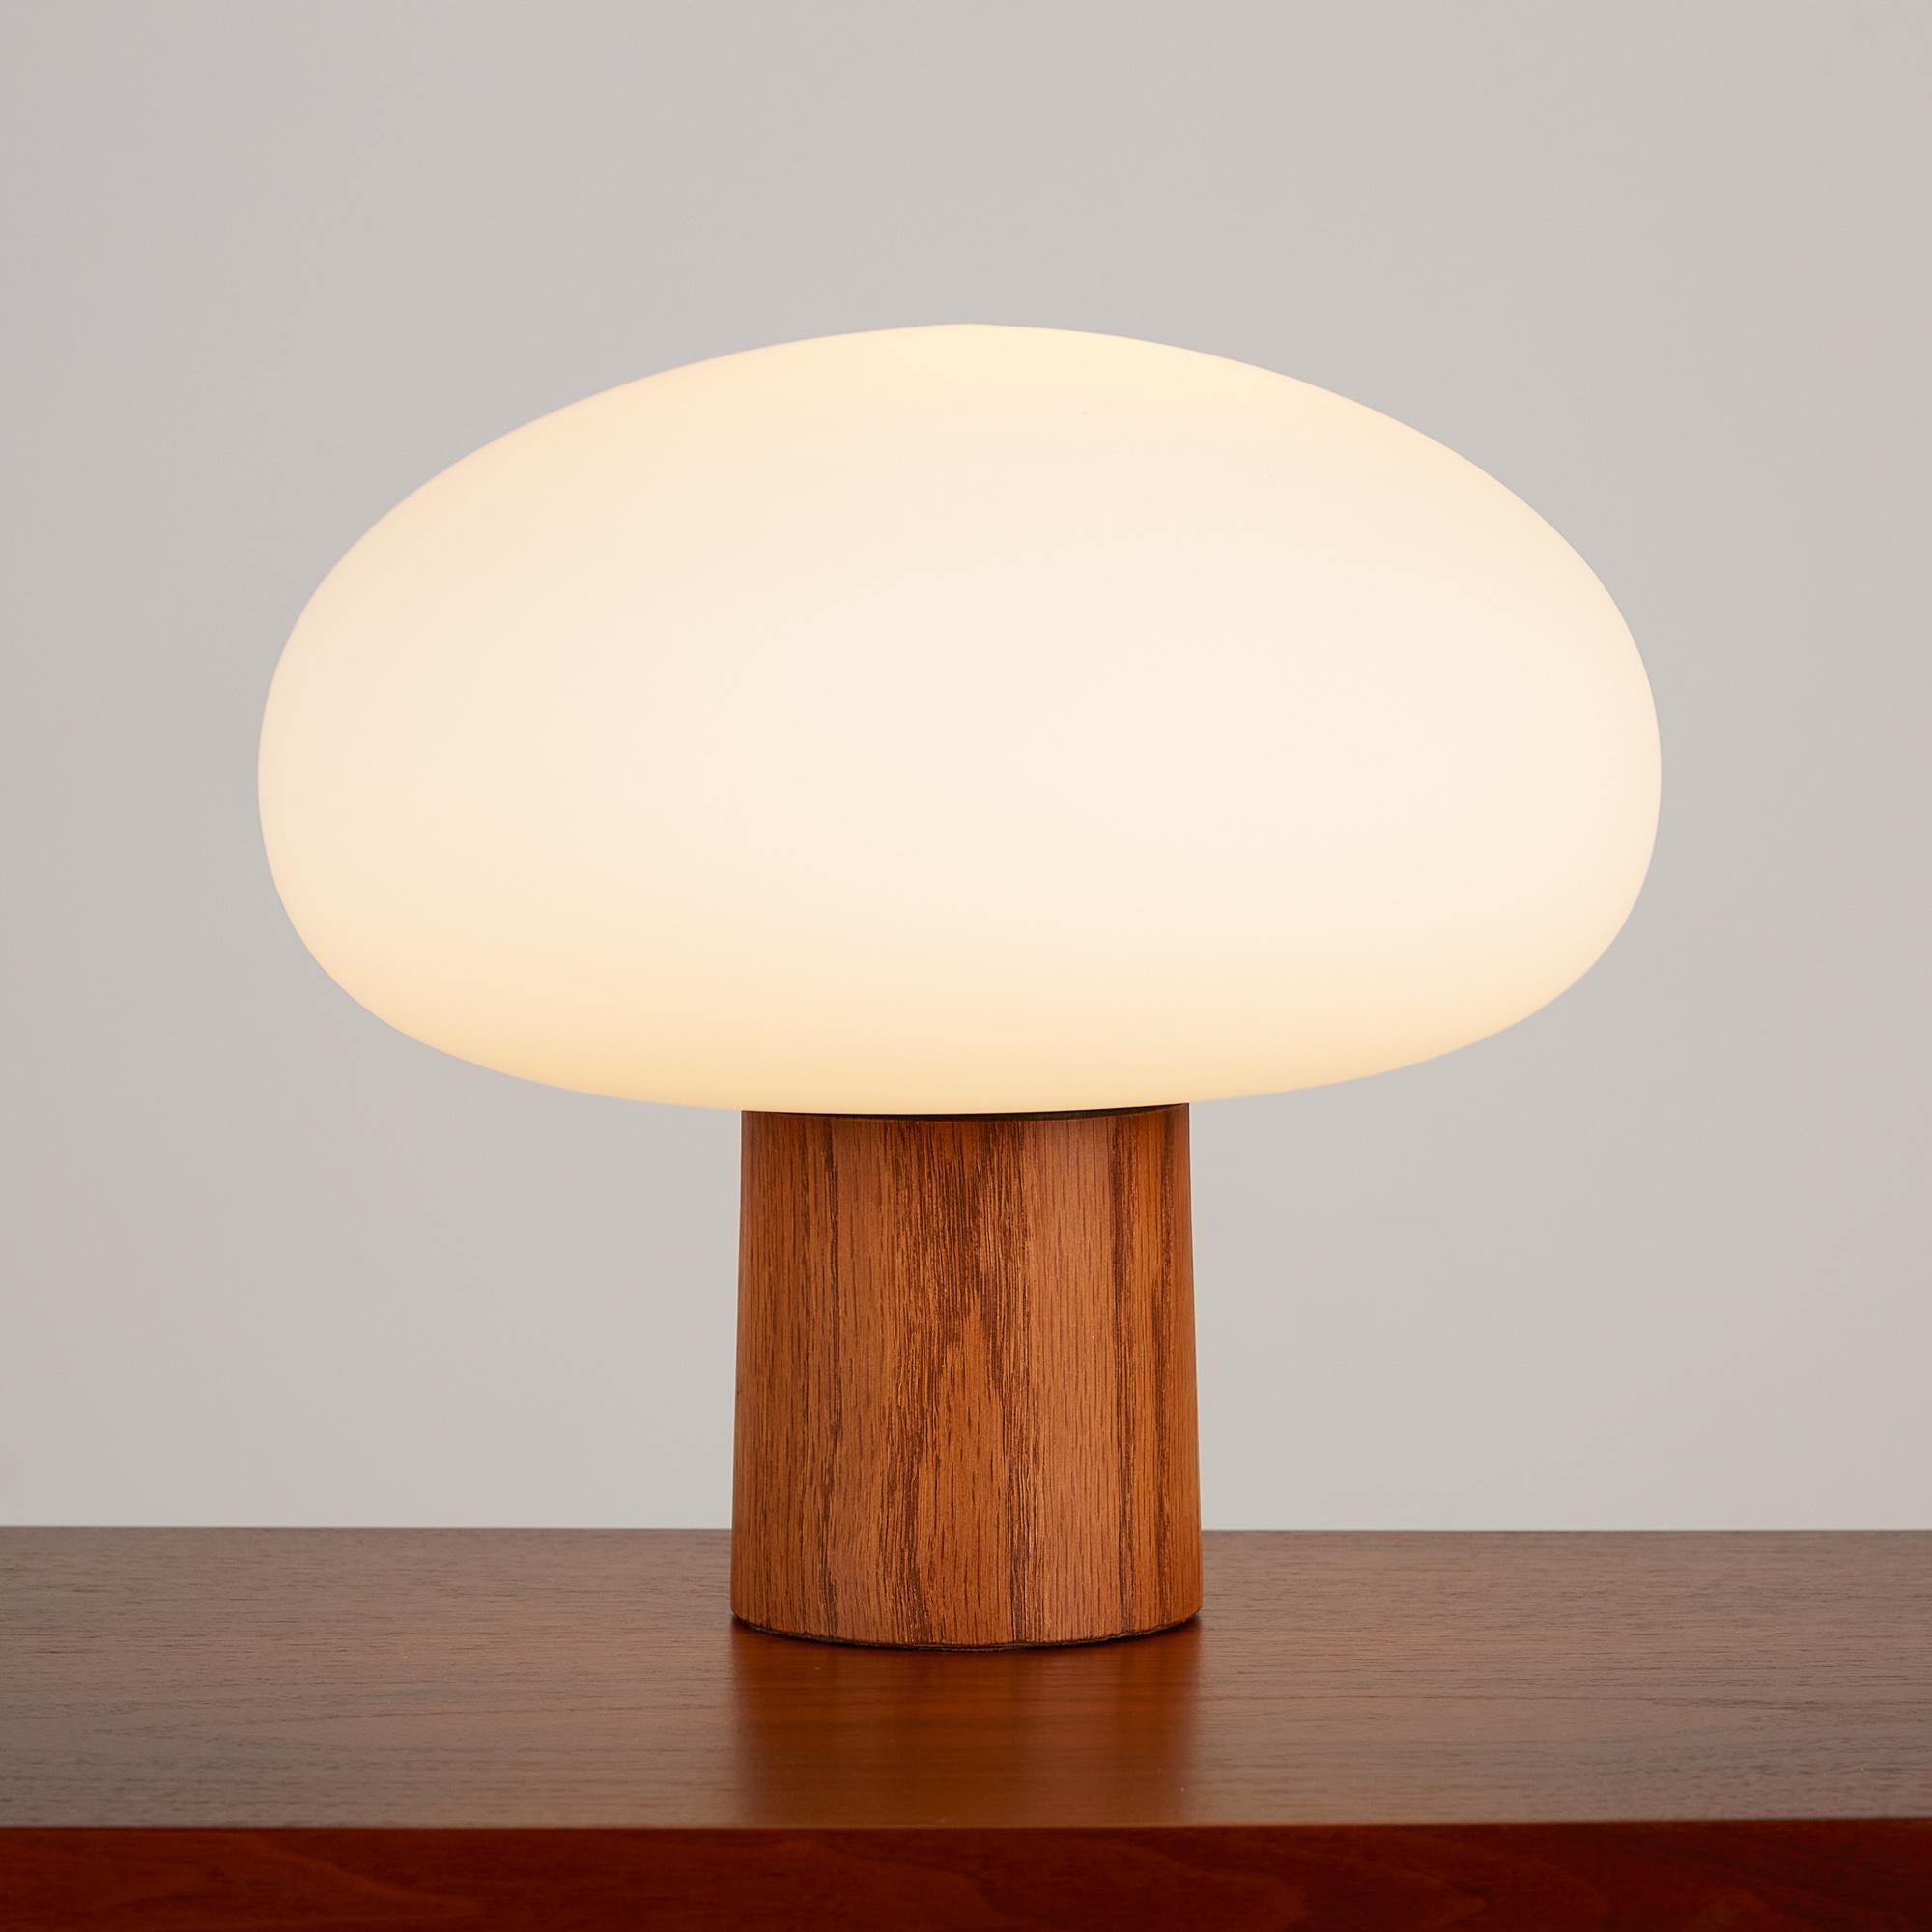 Mushroom table lamp by Laurel Lamp Company, c.1960s, USA. This lamp features a round frosted blown glass bulb and Walnut cylindrical base with the original brass rotary on/off switch. It's a beautiful piece to add mood lighting to any library or